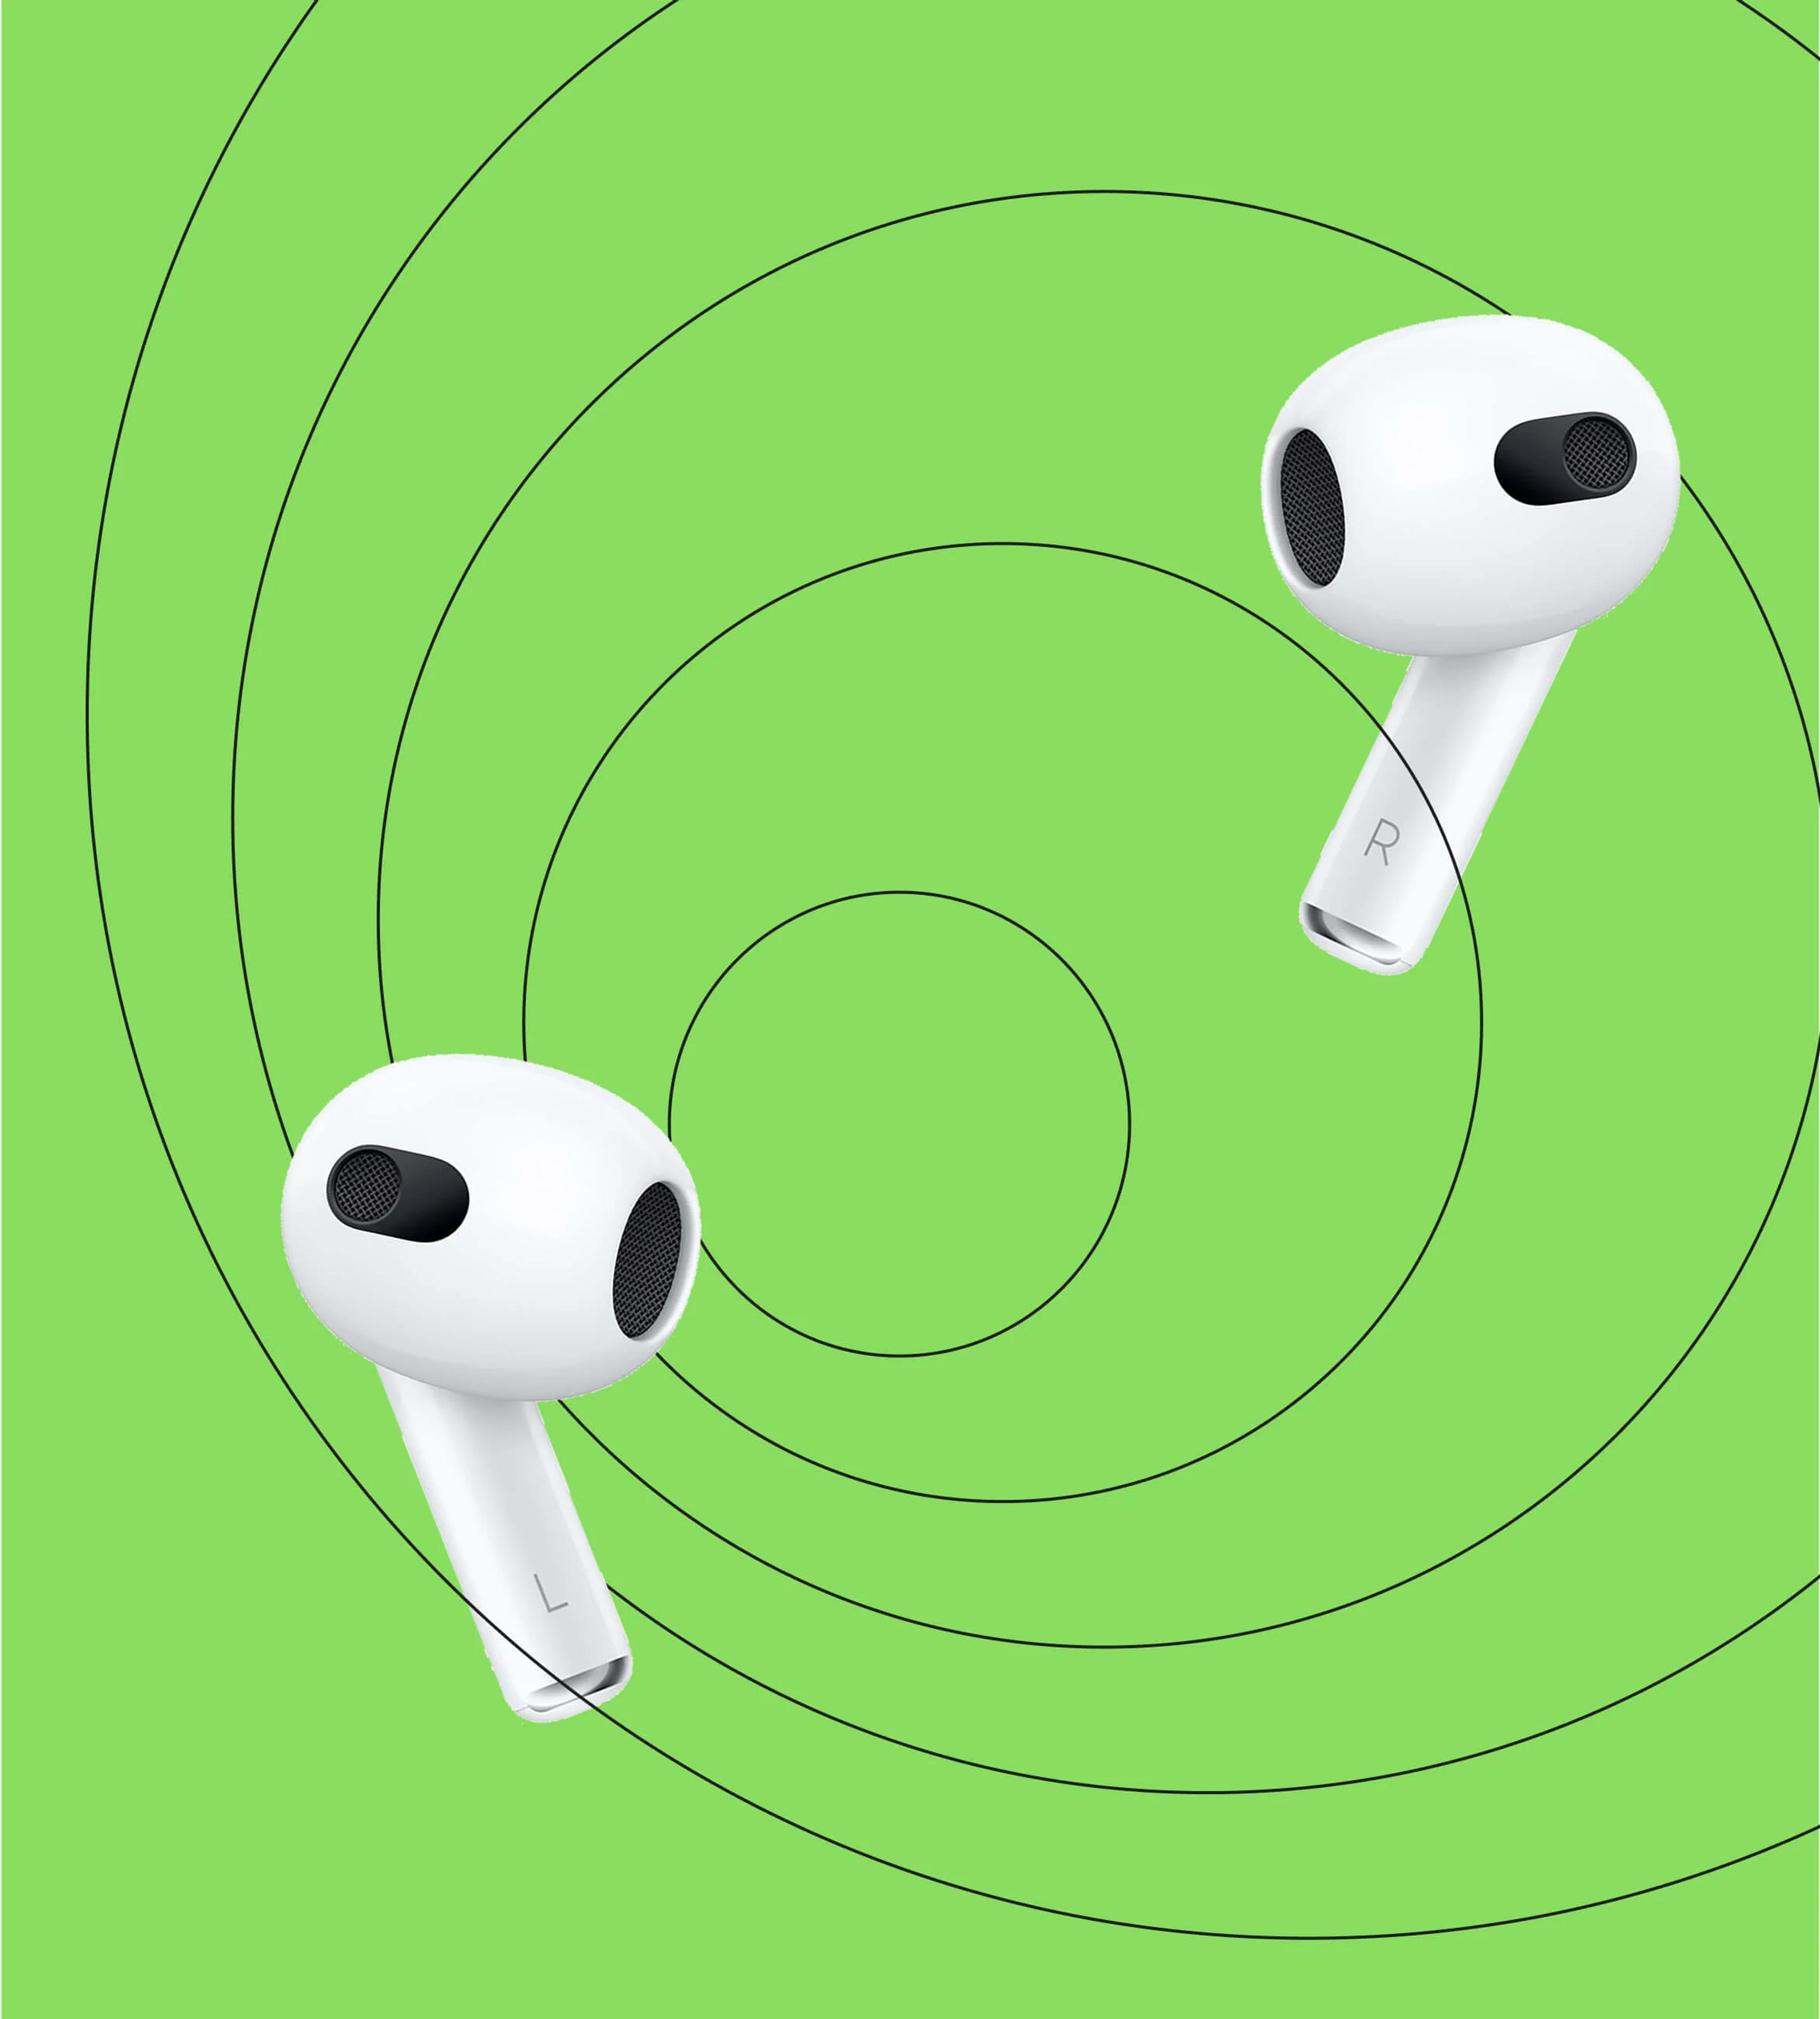 AirPods on a green background